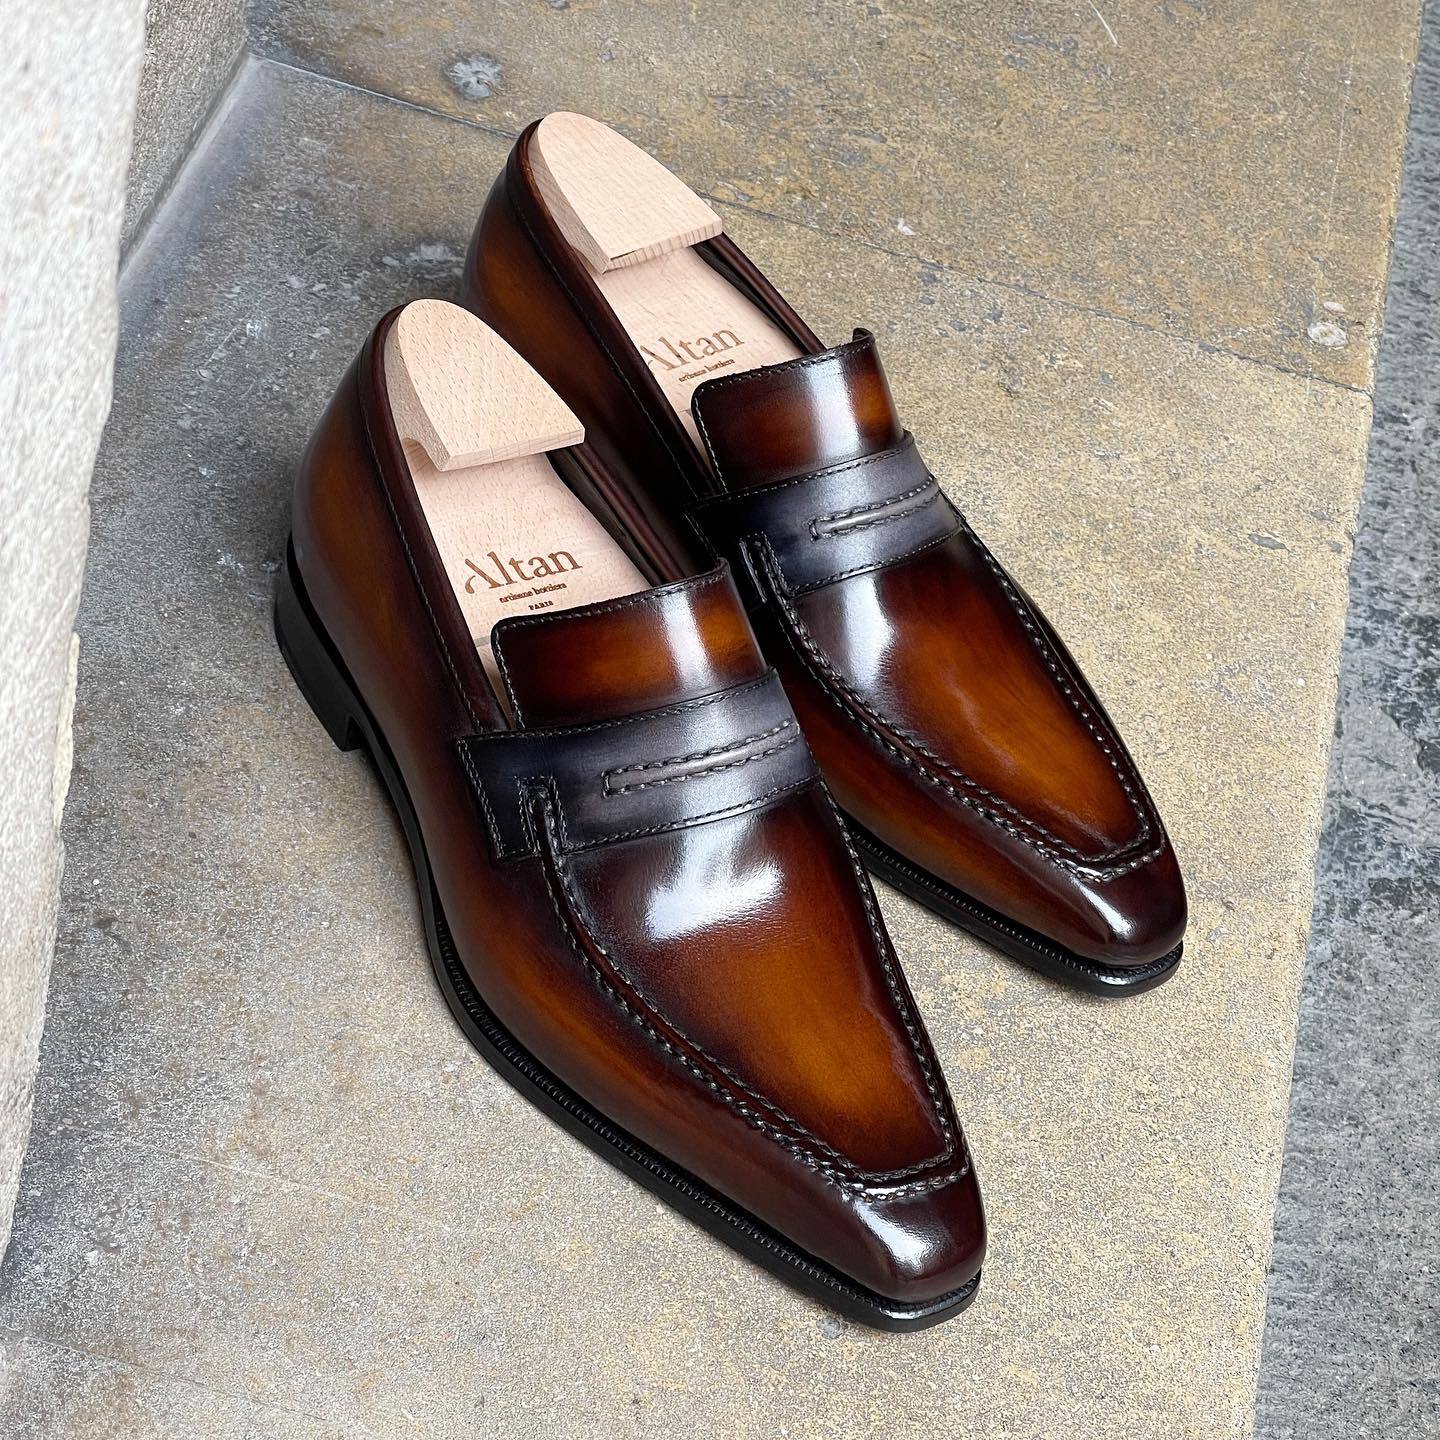 Lincoln Loafer - Caramel and Grey strap